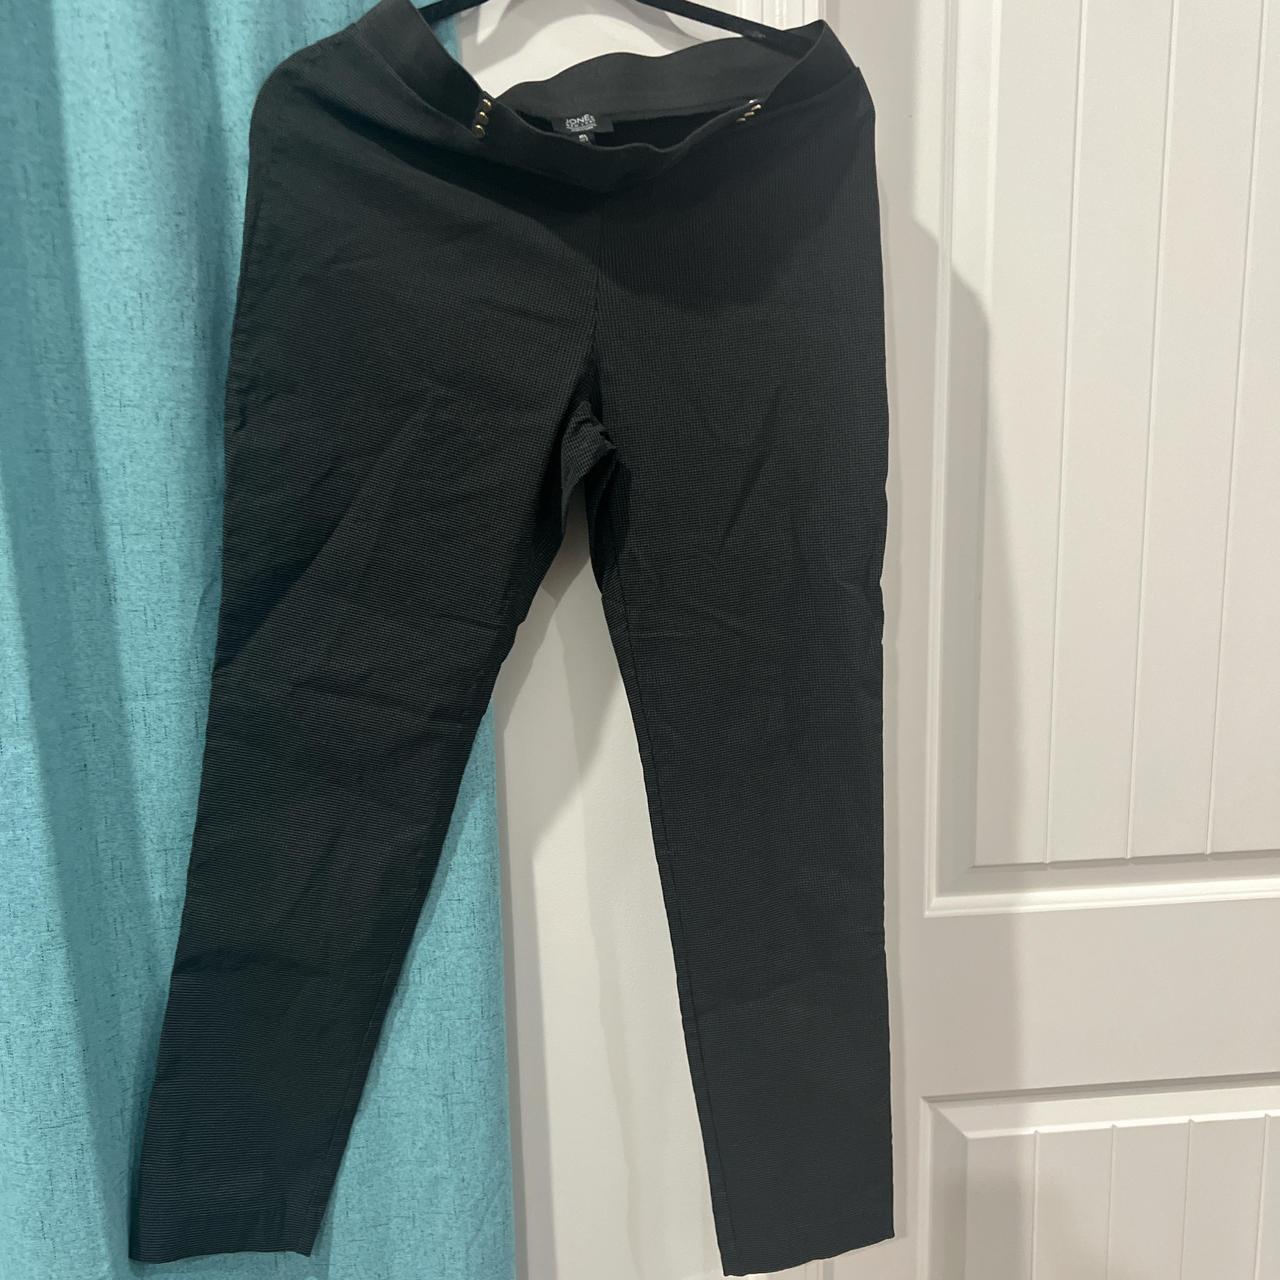 Stretchable pull on pants. Gently worn, no visible - Depop